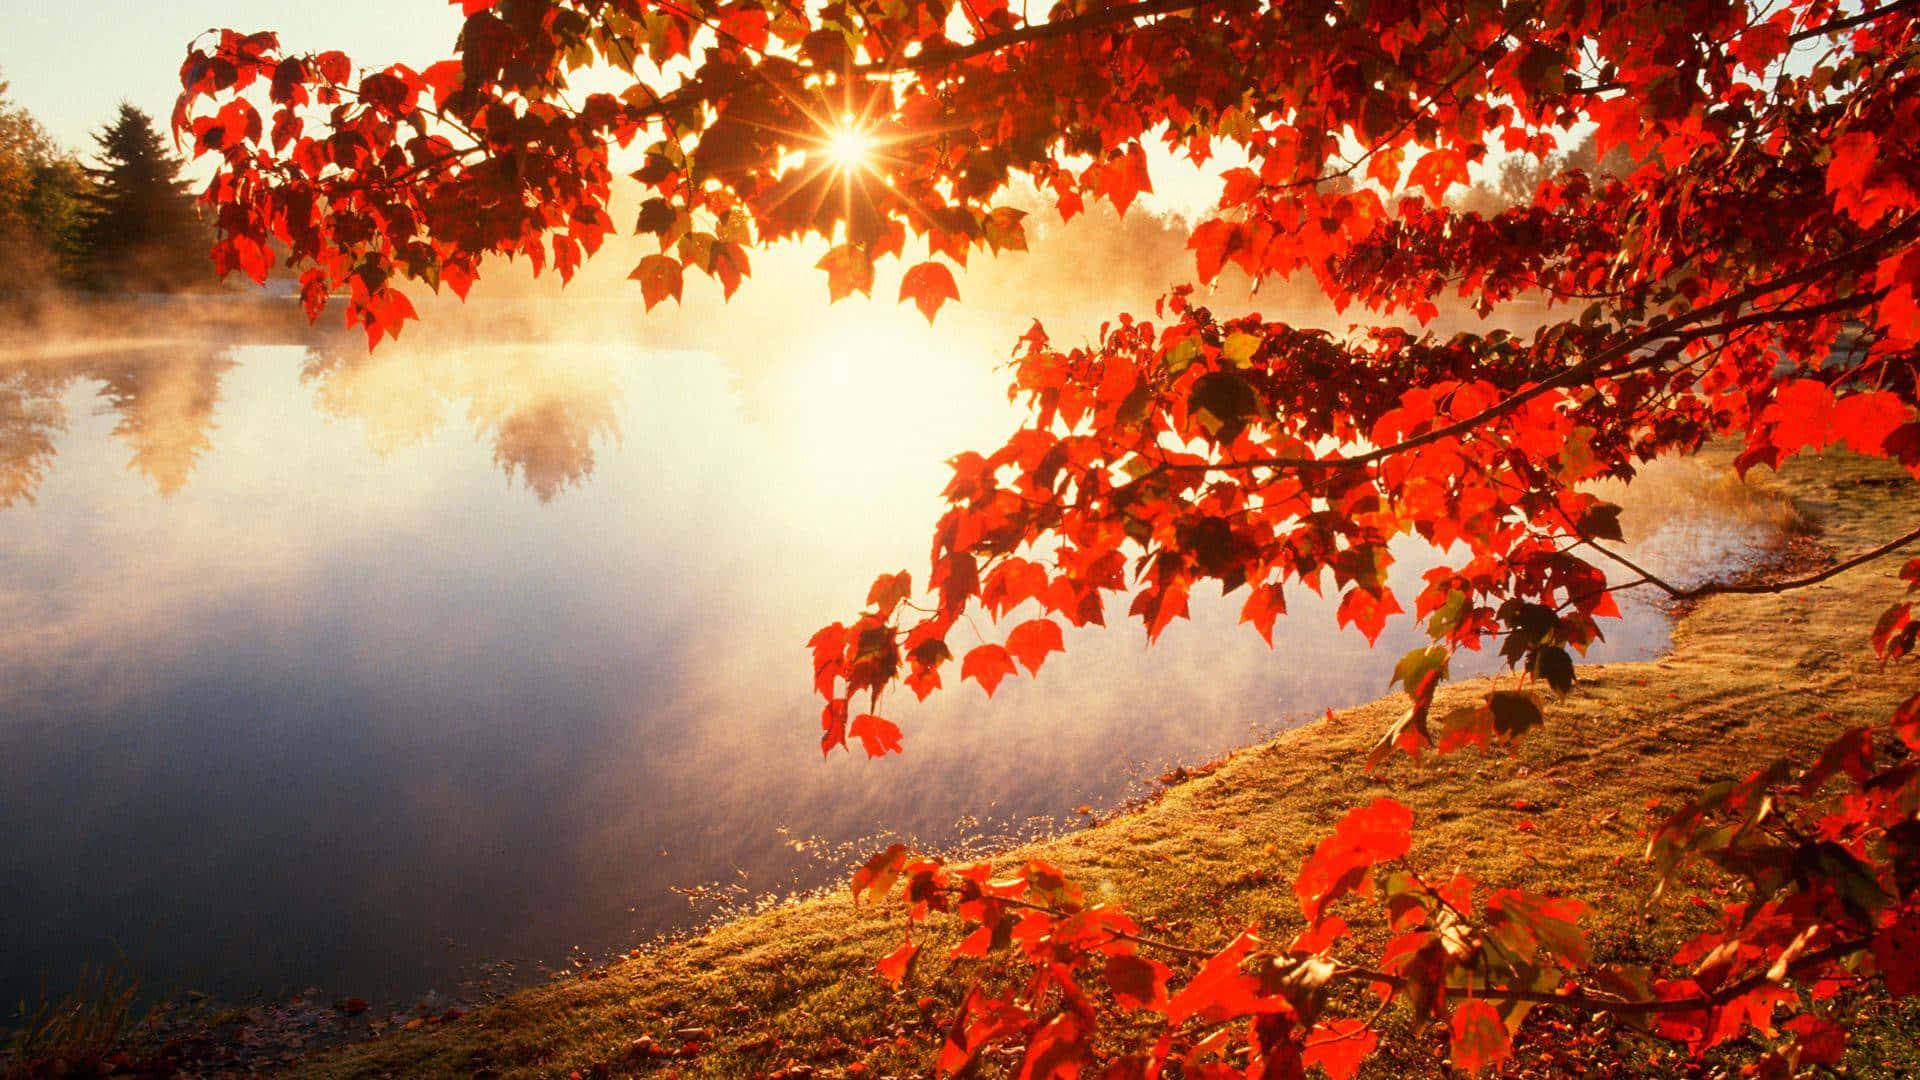 Sunny Day Scenery Hd Fall Background